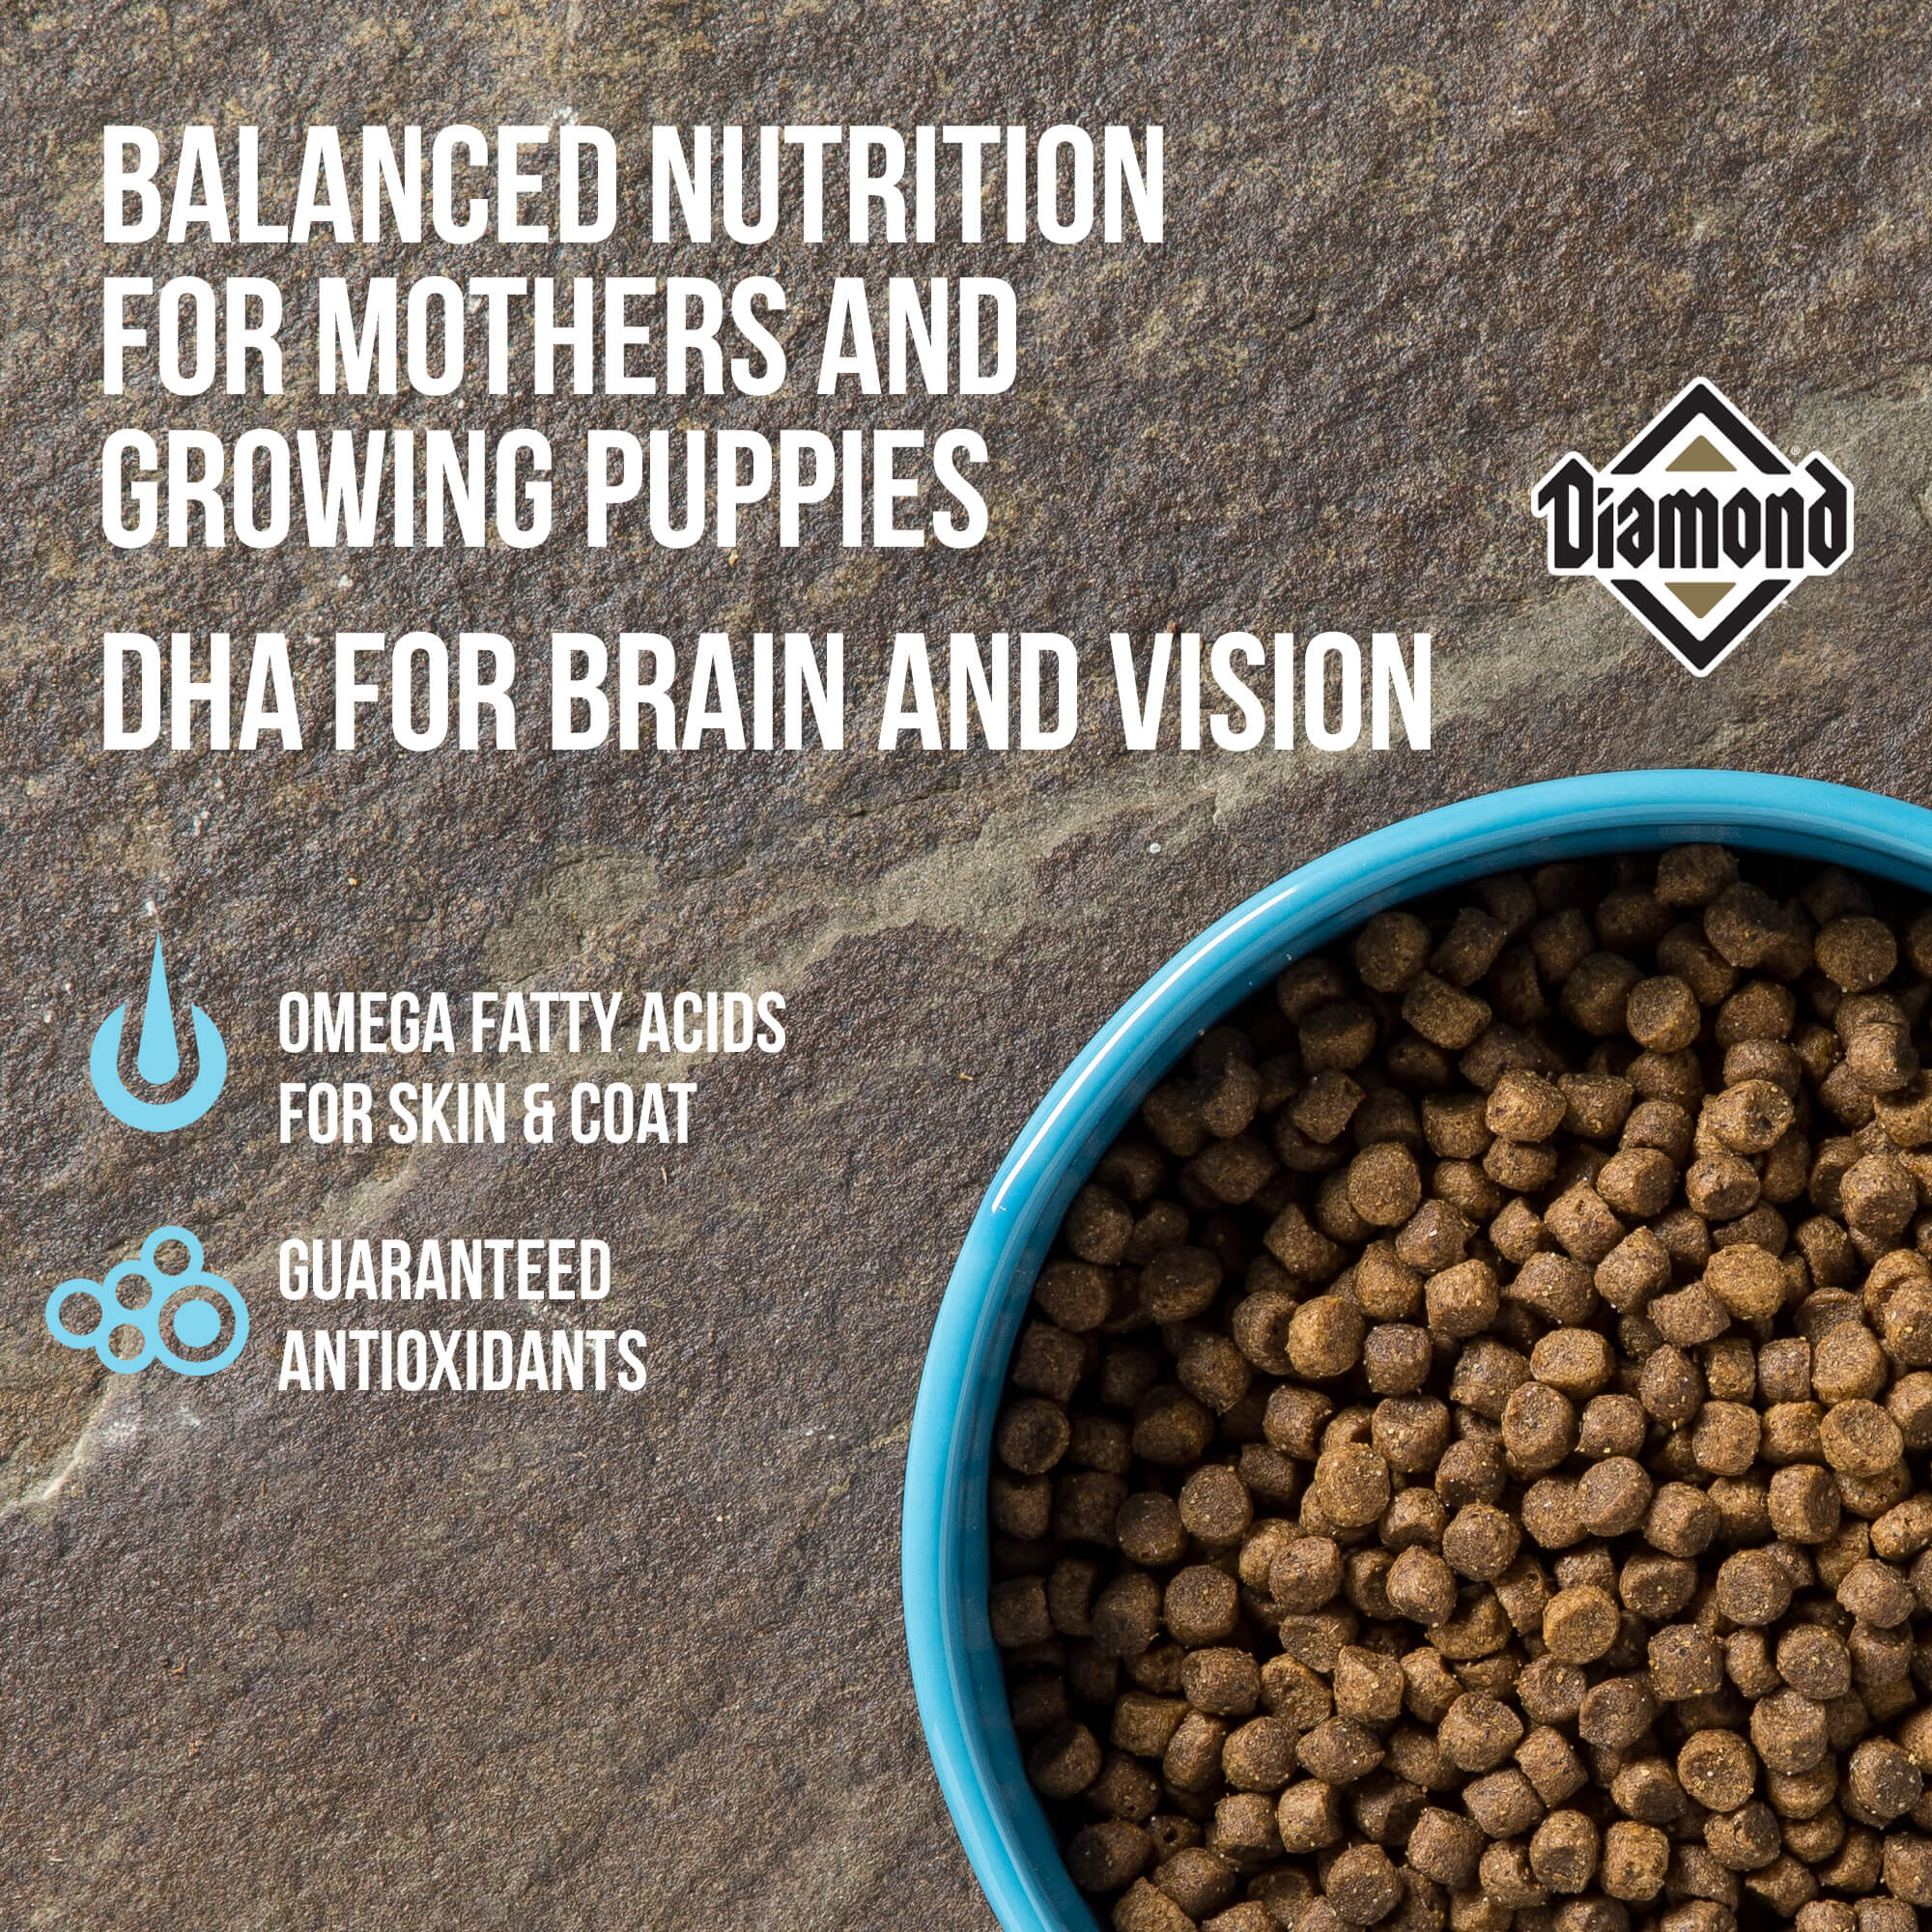 Diamond Balanced nutrition for mothers and gorwing puppies